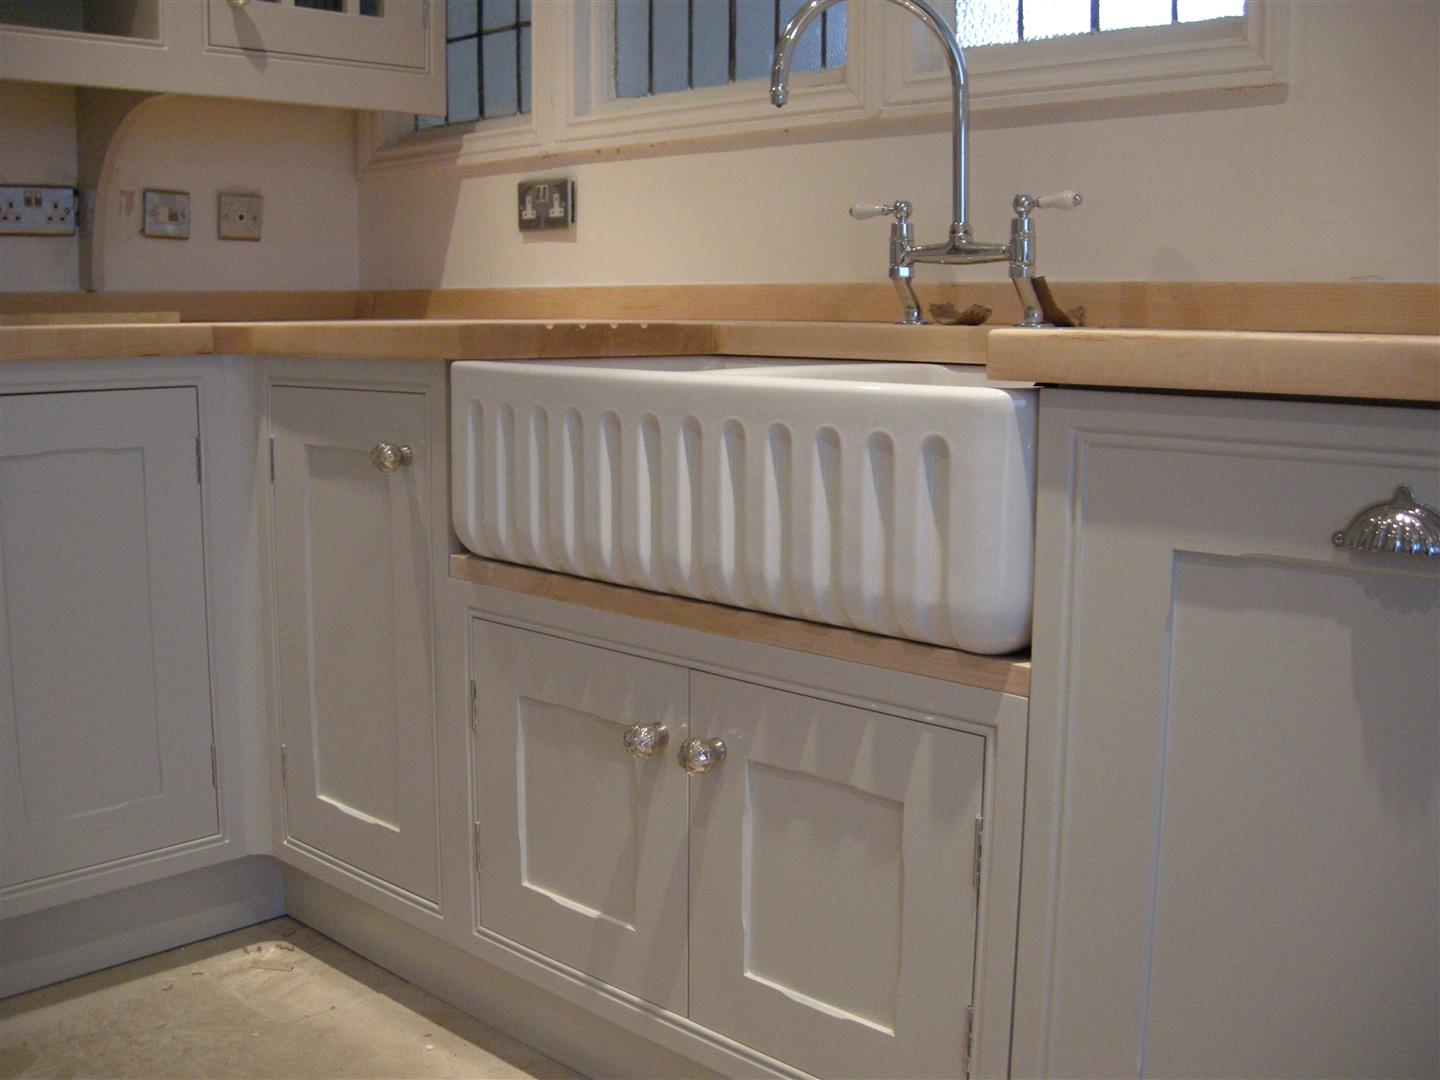 Redbrook kitchens design and install bespoke kitchens in Gloucestershire Traditional Shaker with panel moulded frame, showing sculptured Belfast type sink